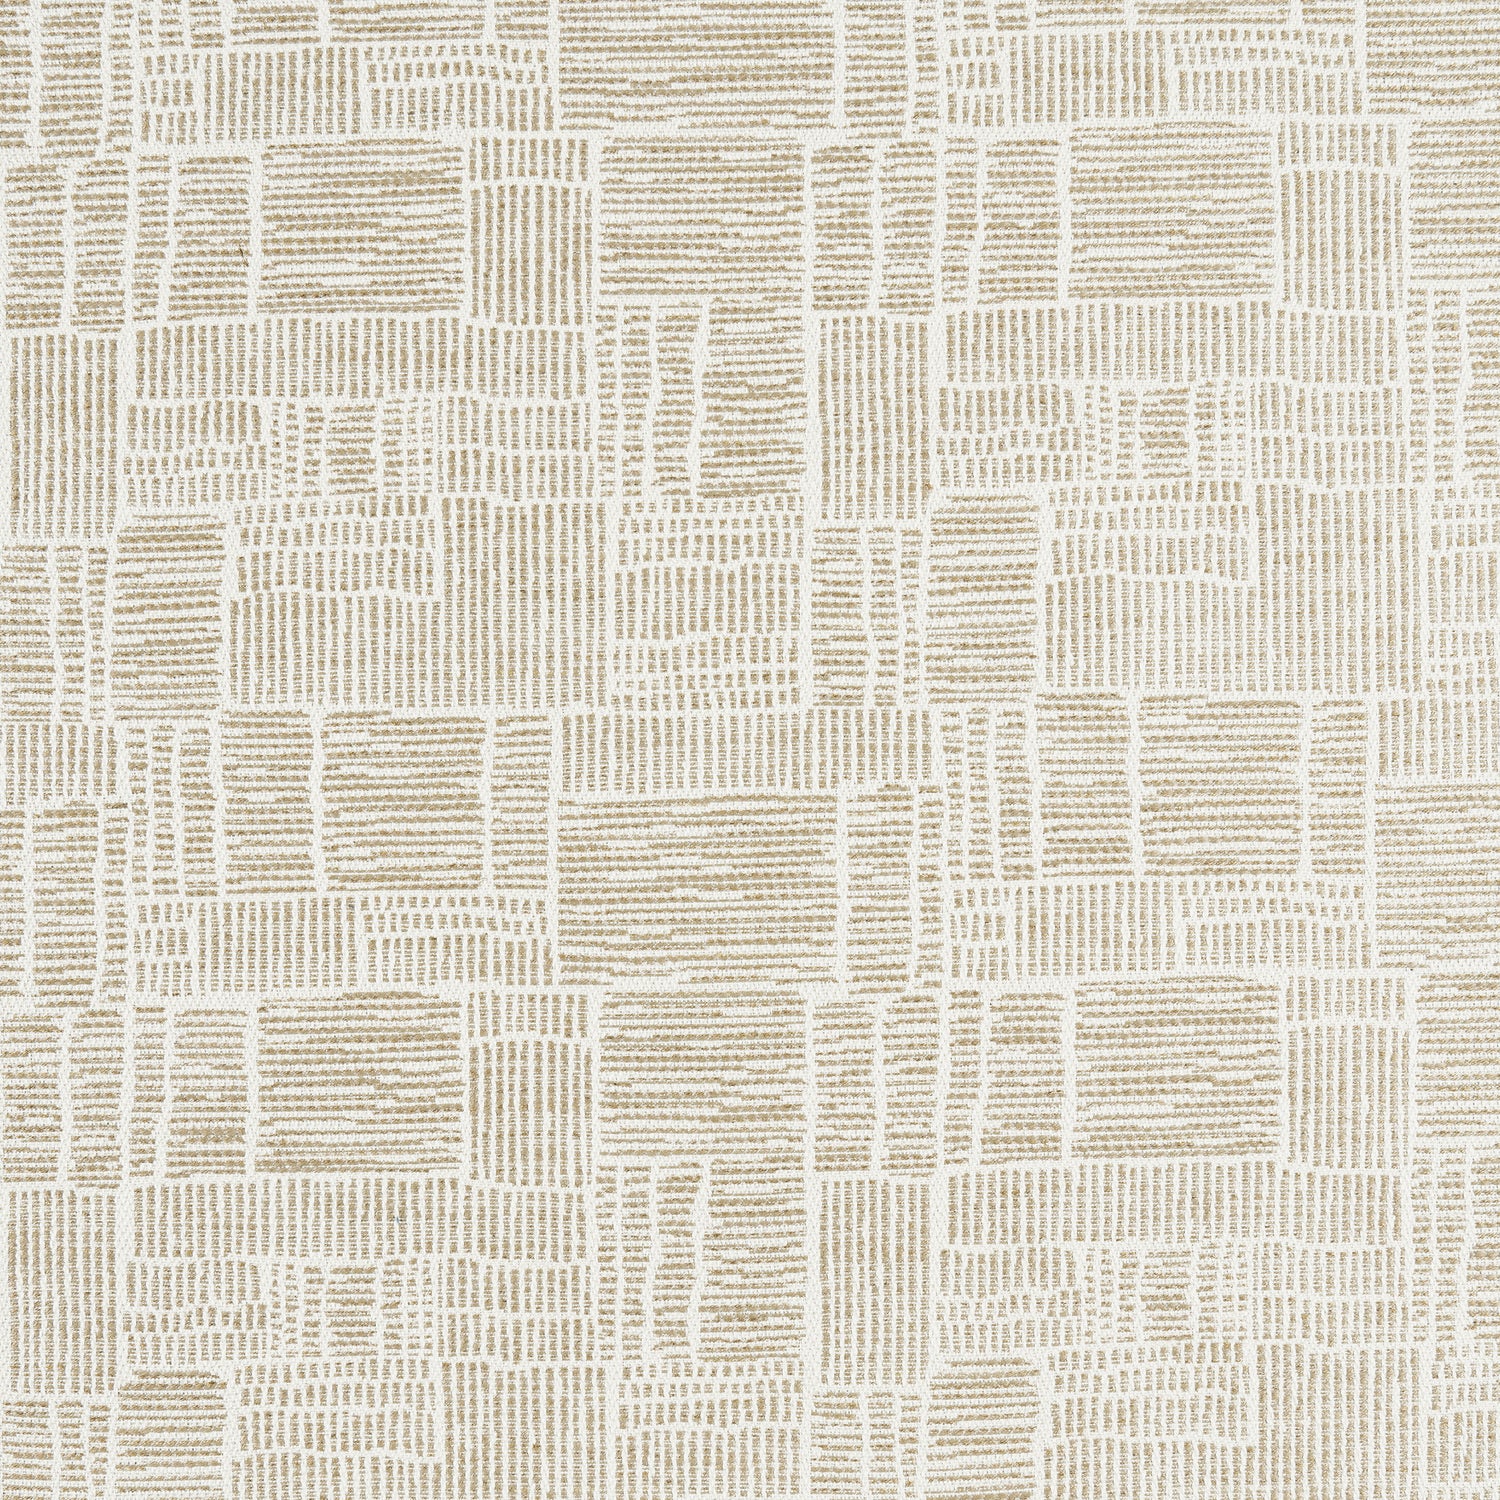 Vario fabric in cashmere color - pattern number W8123 - by Thibaut in the Sereno collection